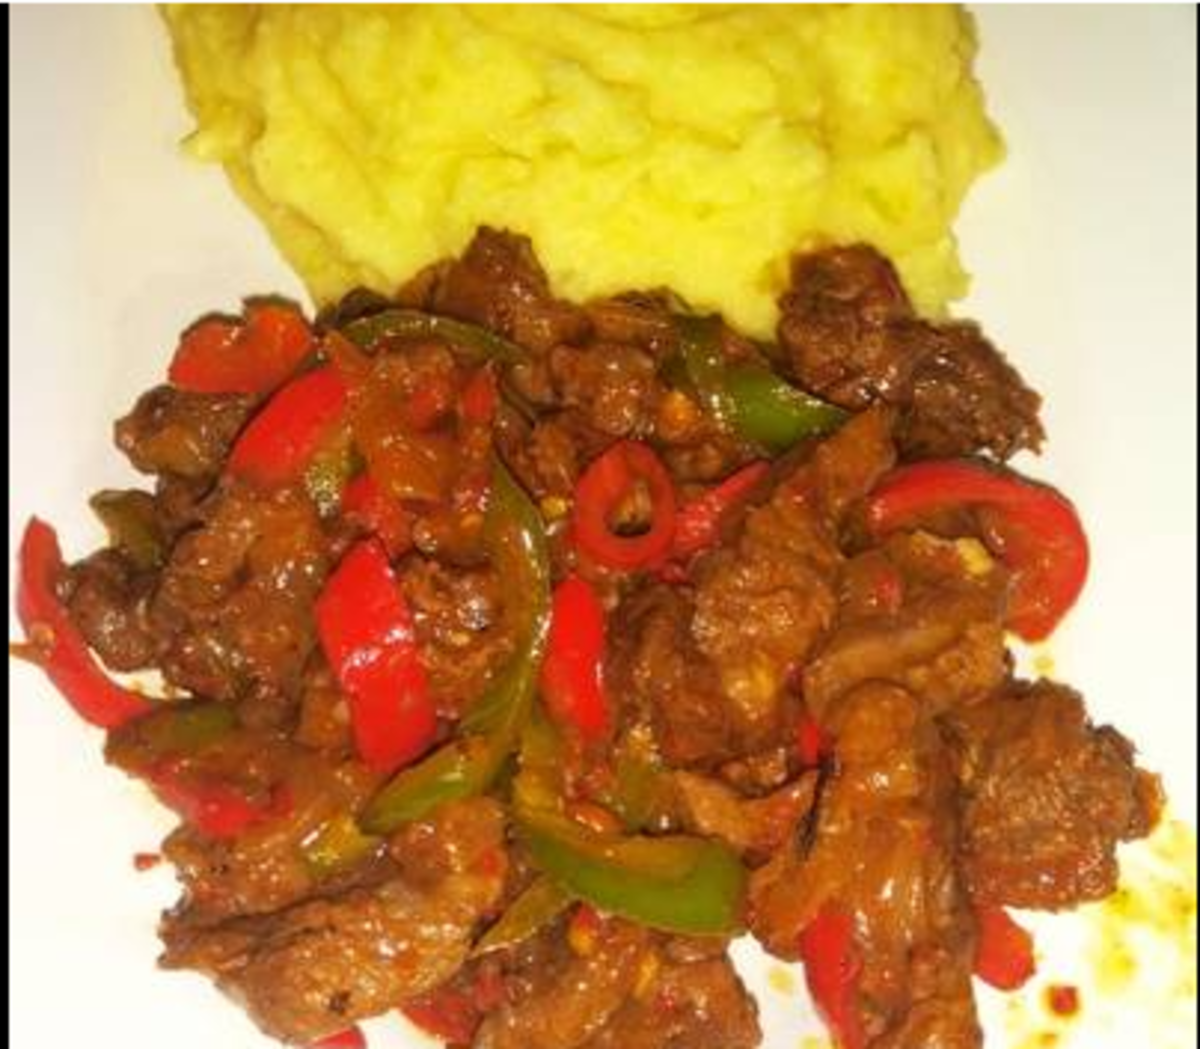 Wukunu and strifried goat meat